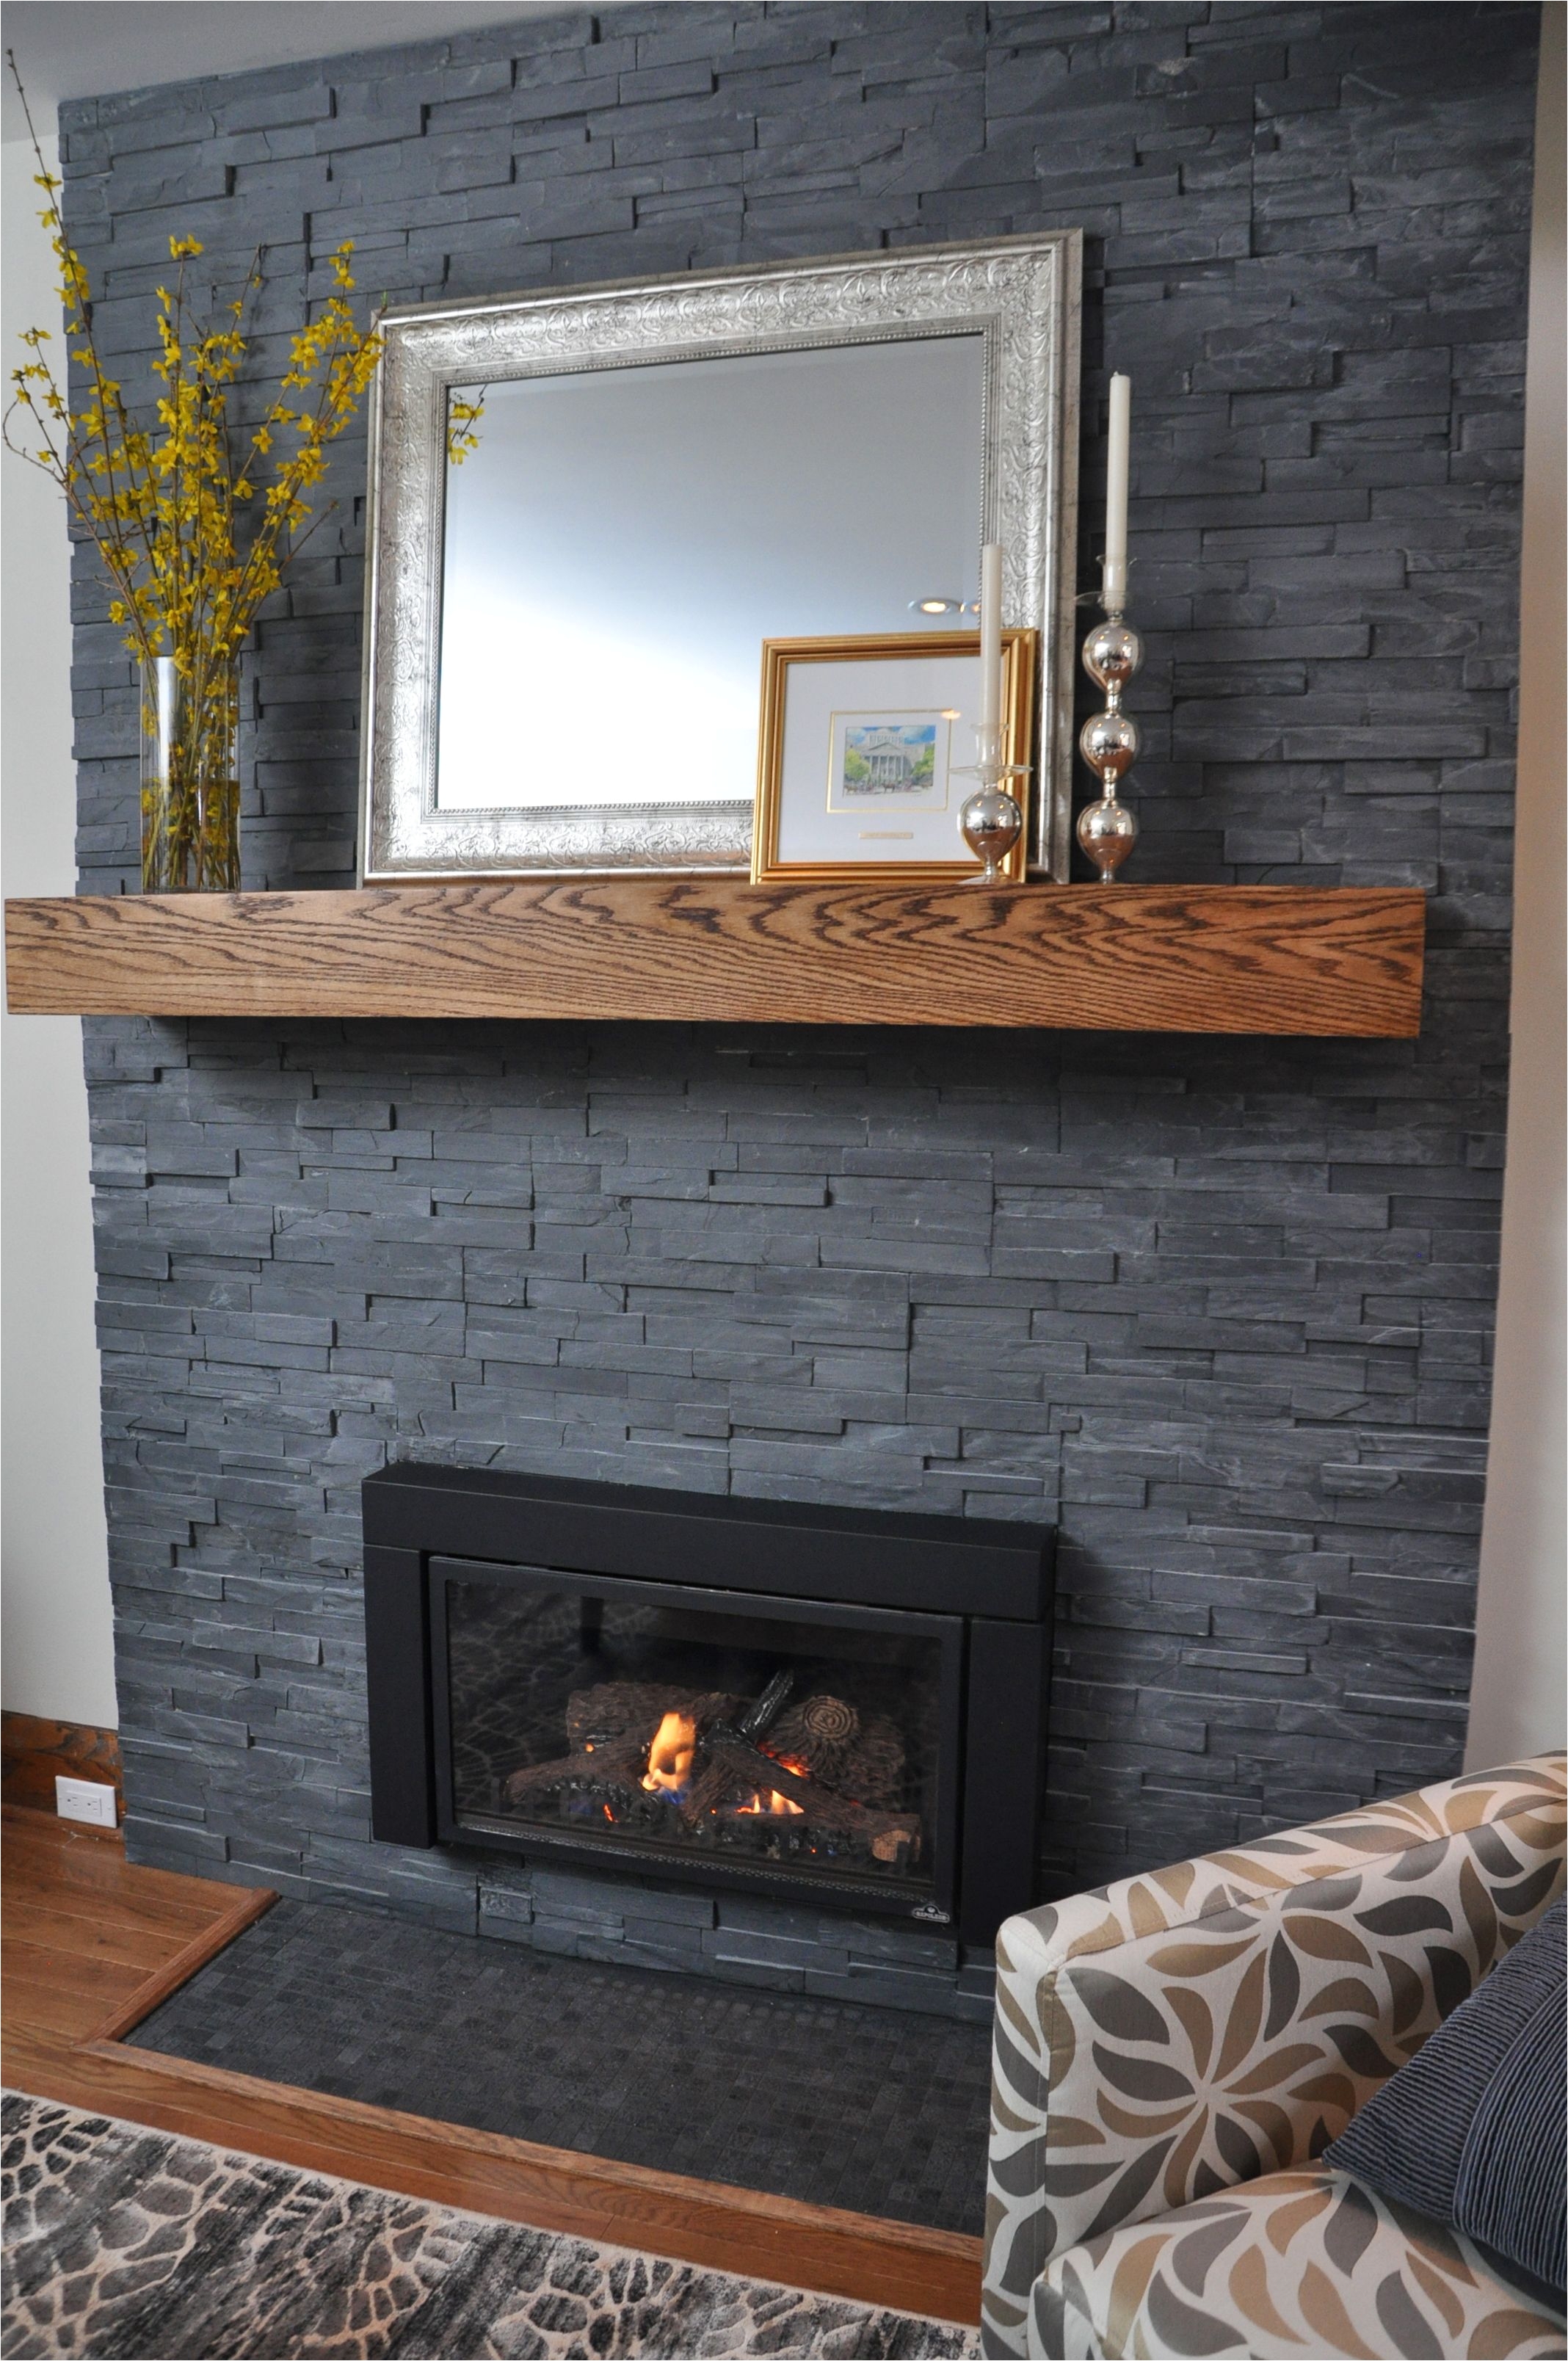 if we decide to redo our fireplace then i would love to mimic this stone effect